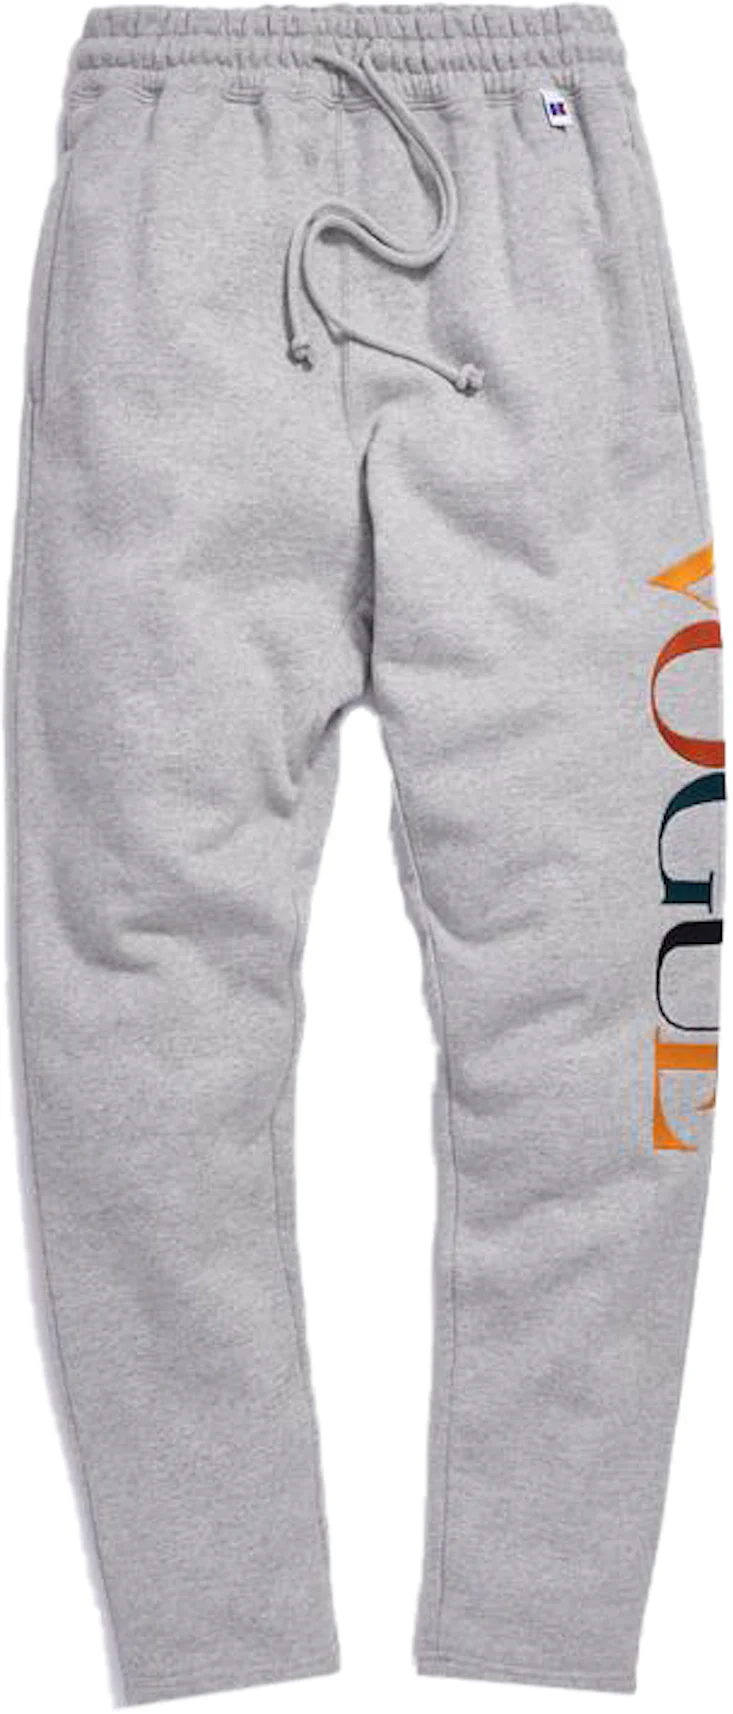 Kith x Russell Athletic x Vogue Williams Soho Sweatpant Heather